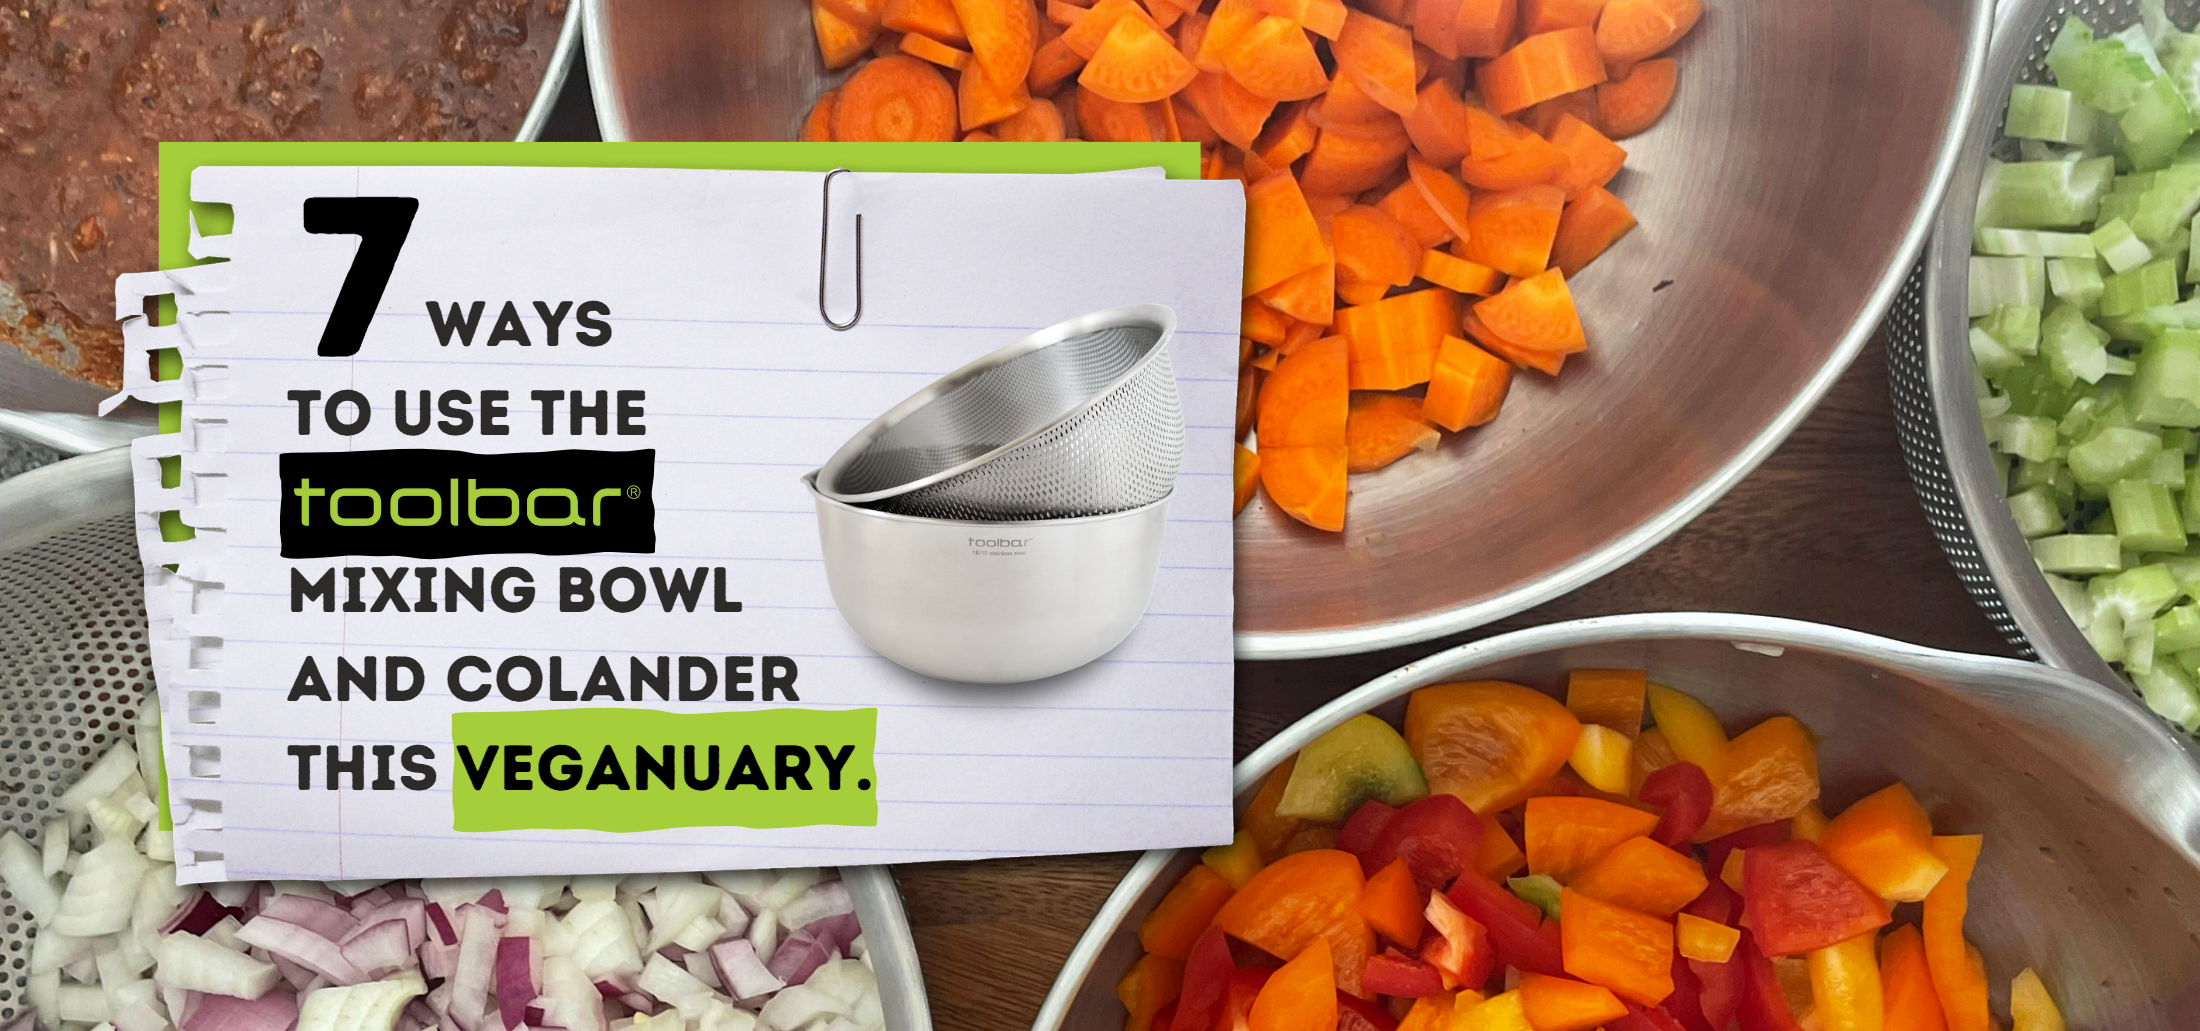 7 ways to use the Toolbar Mixing Bowl and Colander this Veganuary.